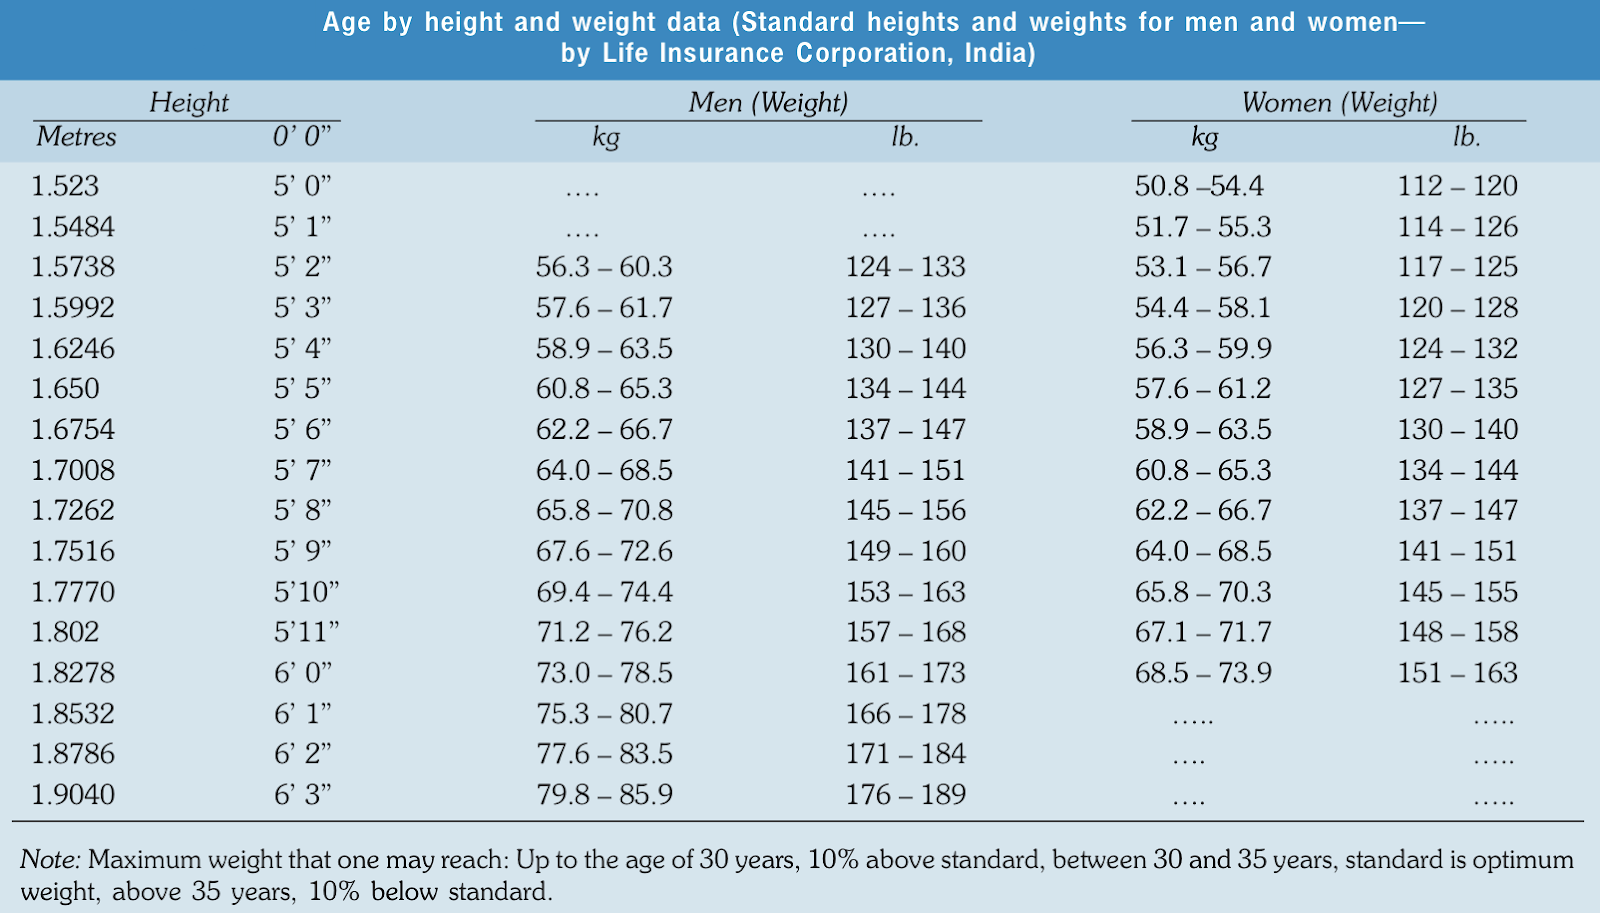 Age by Height and Weight Data